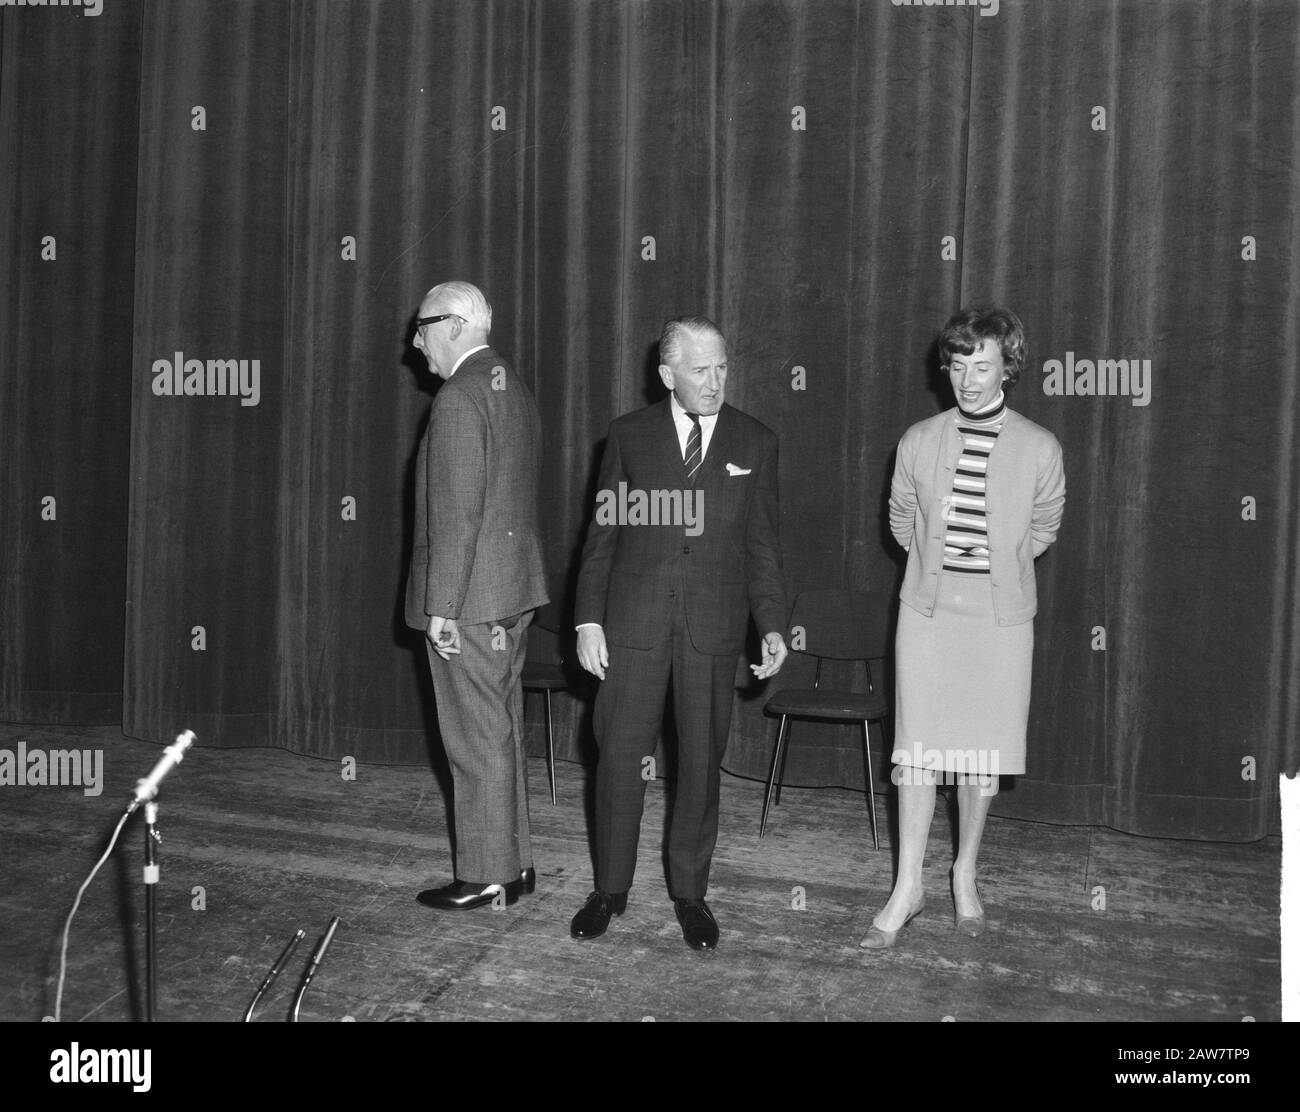 Premiere Snip and Snap Together revue From Friday, during rehearsal v.l.n.r. Piet Muyselaar, Aase Rasmussen, Mieke Telkamp and Willy Walden Date: January 21, 1965 Keywords: rehearsals, revues Person Name: Muyselaar, Piet, Telkamp, Mieke, Walden, Willy Stock Photo